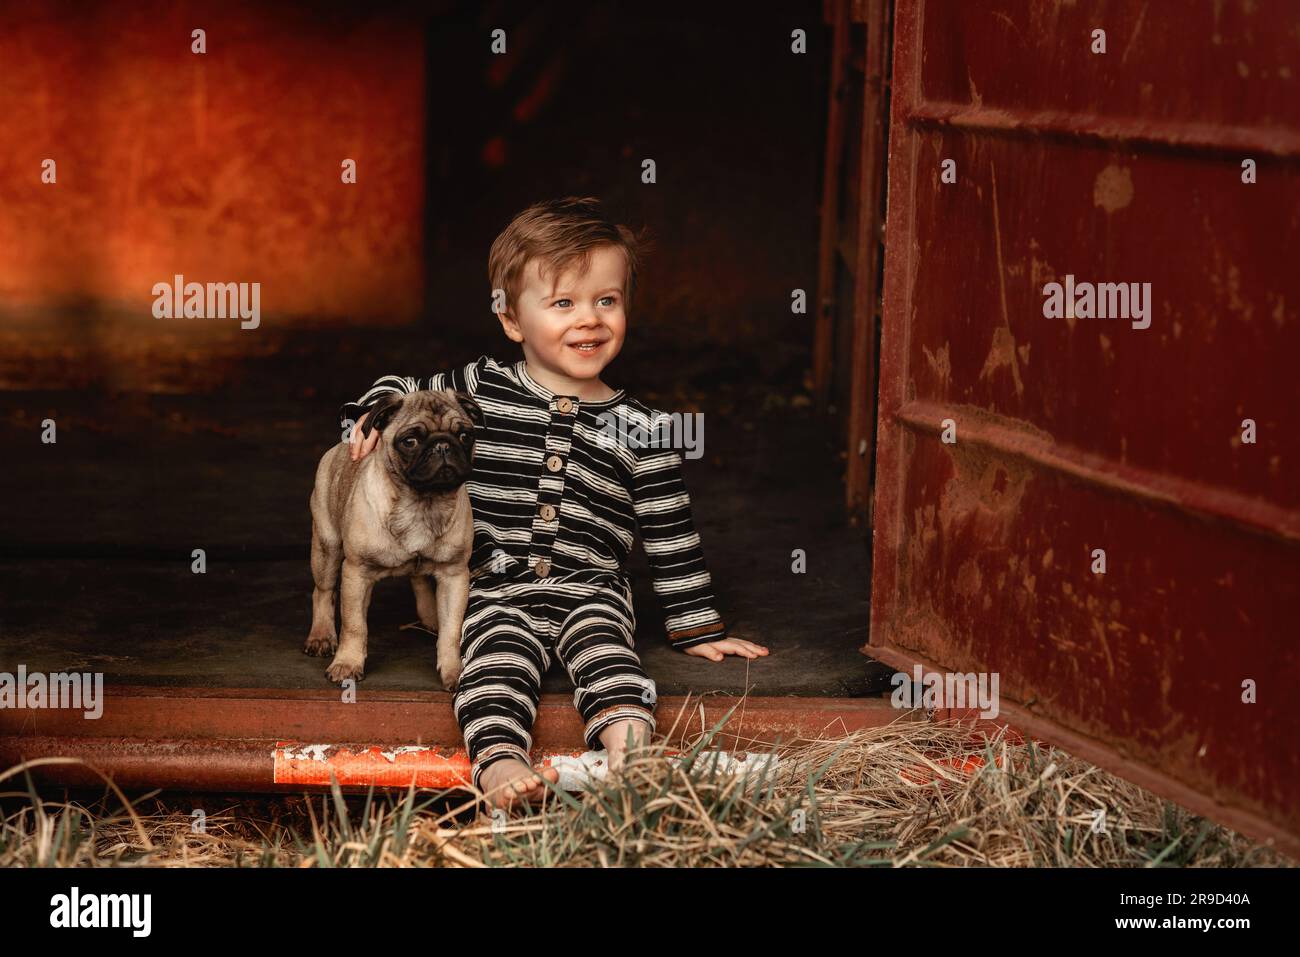 baby boy toddler with a pug puppy sitting down Stock Photo